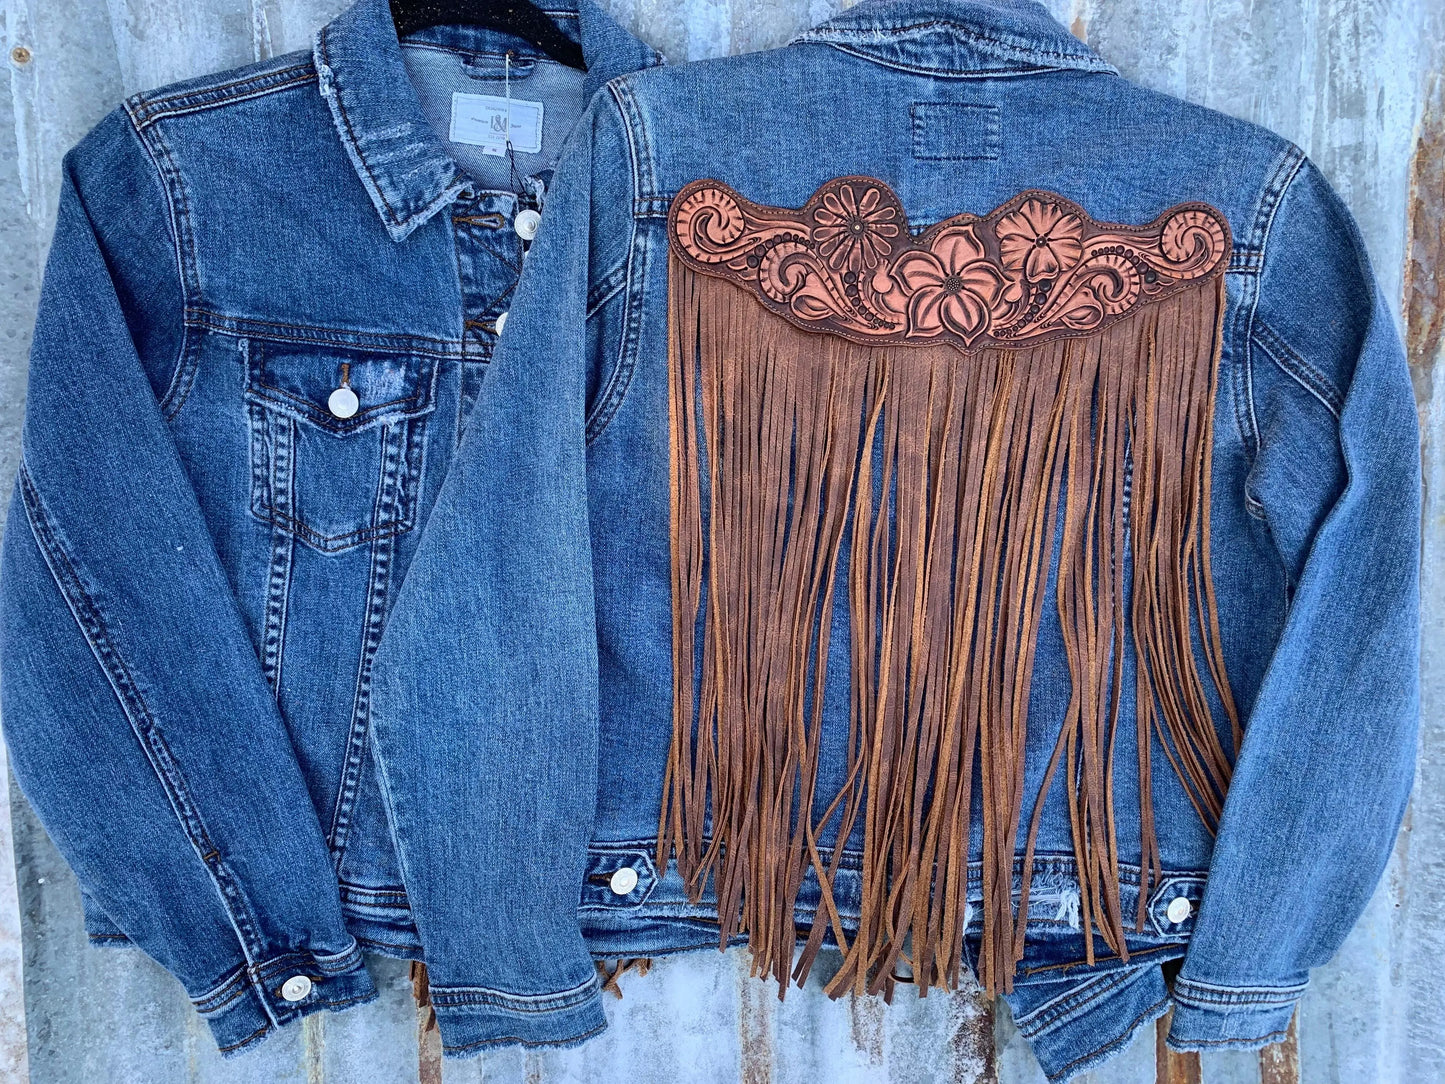 Handtooled Leather Denim Jacket in Brown and Golden Tan with Xtra Long Fringe The Rodeo Rose